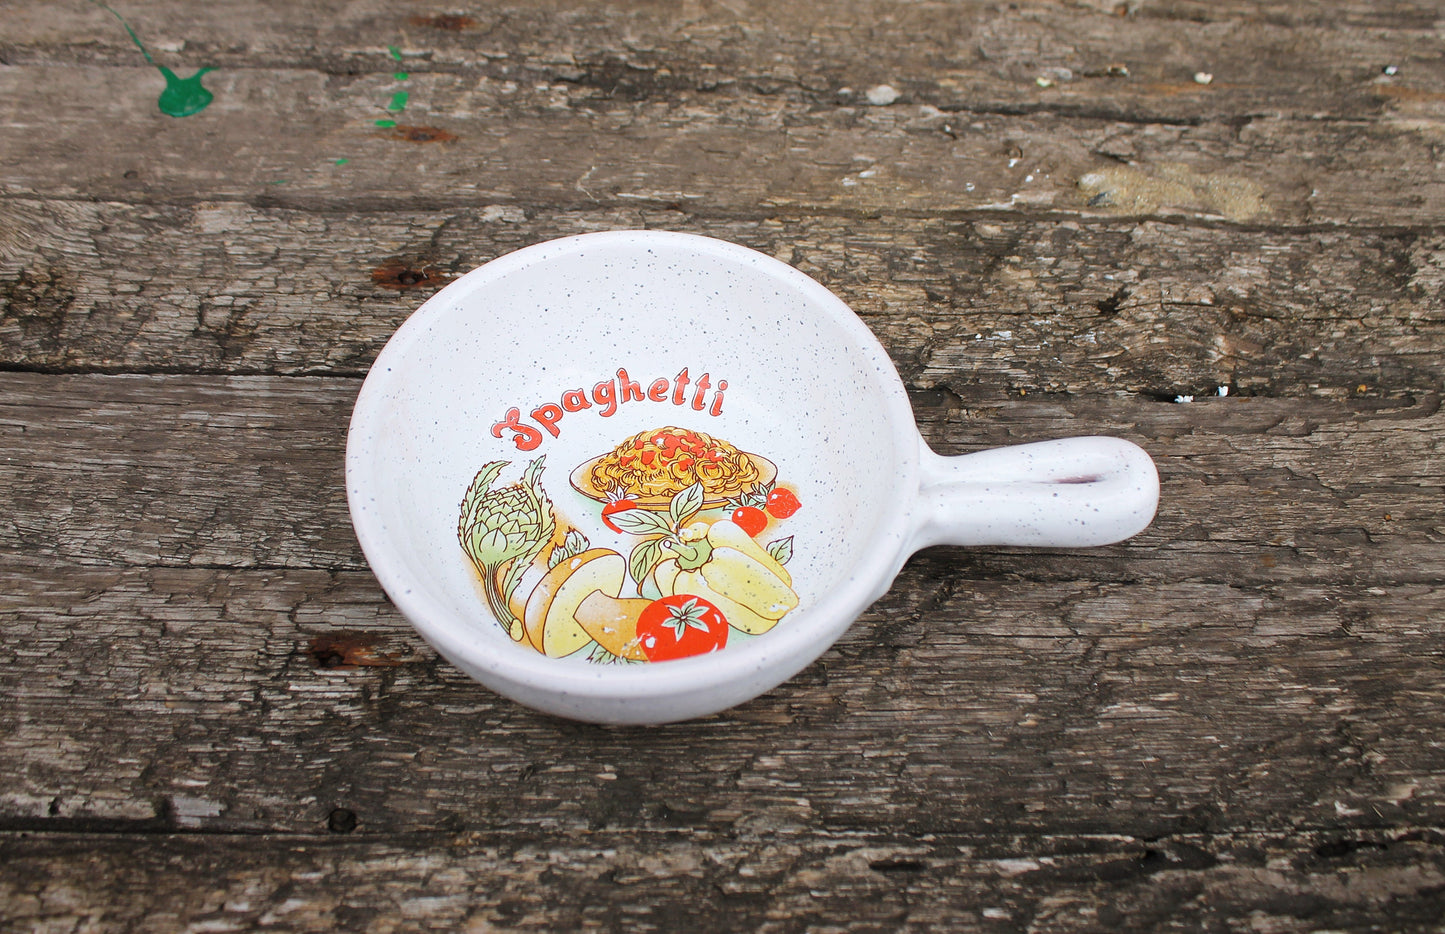 Beautiful ceramic vintage frying pan - made in Germany - 1970-1980s